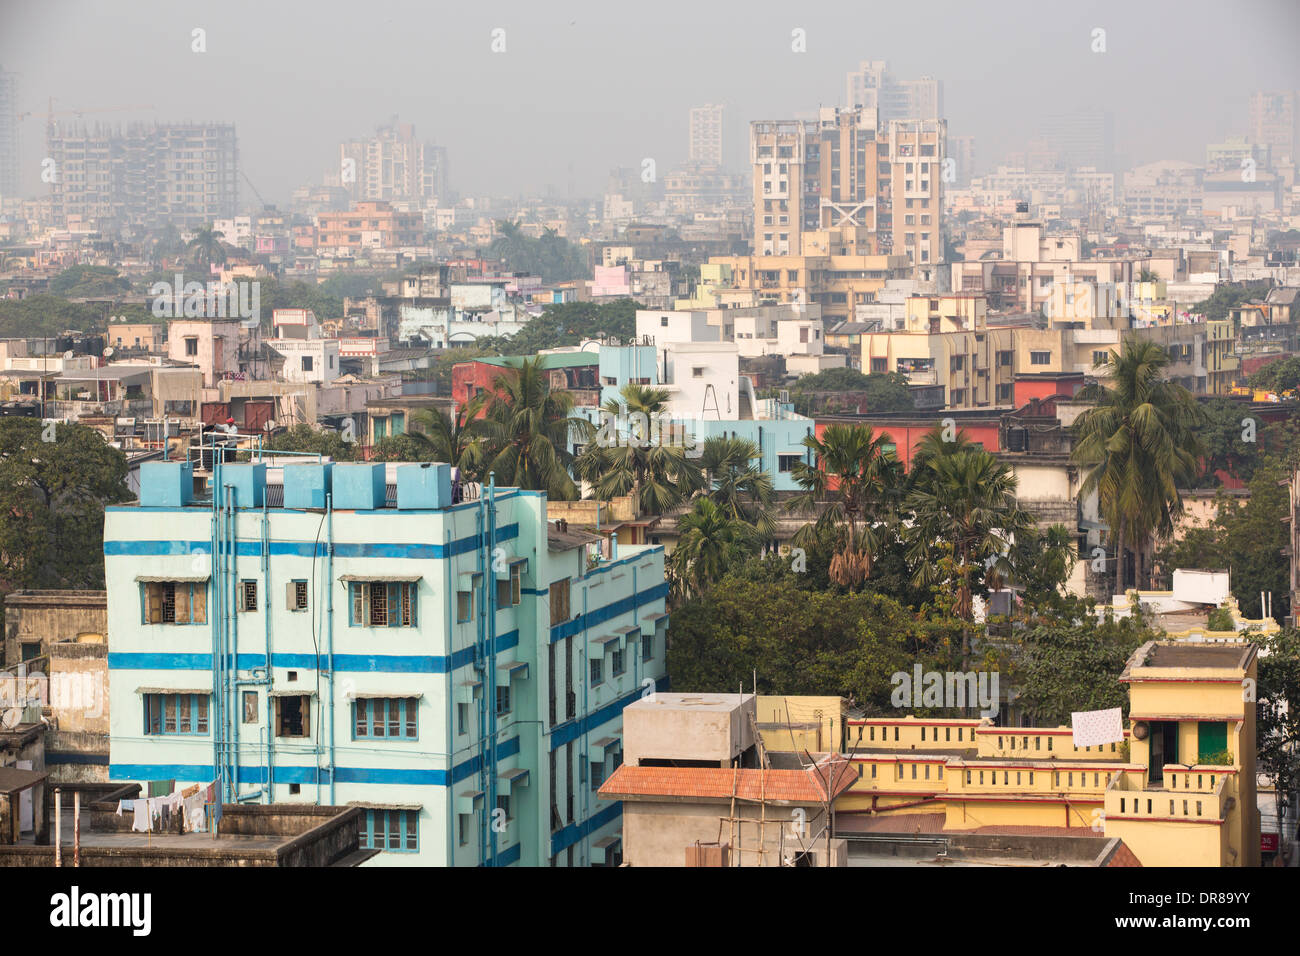 Poor air quality and pollution over calcutta, India. Stock Photo